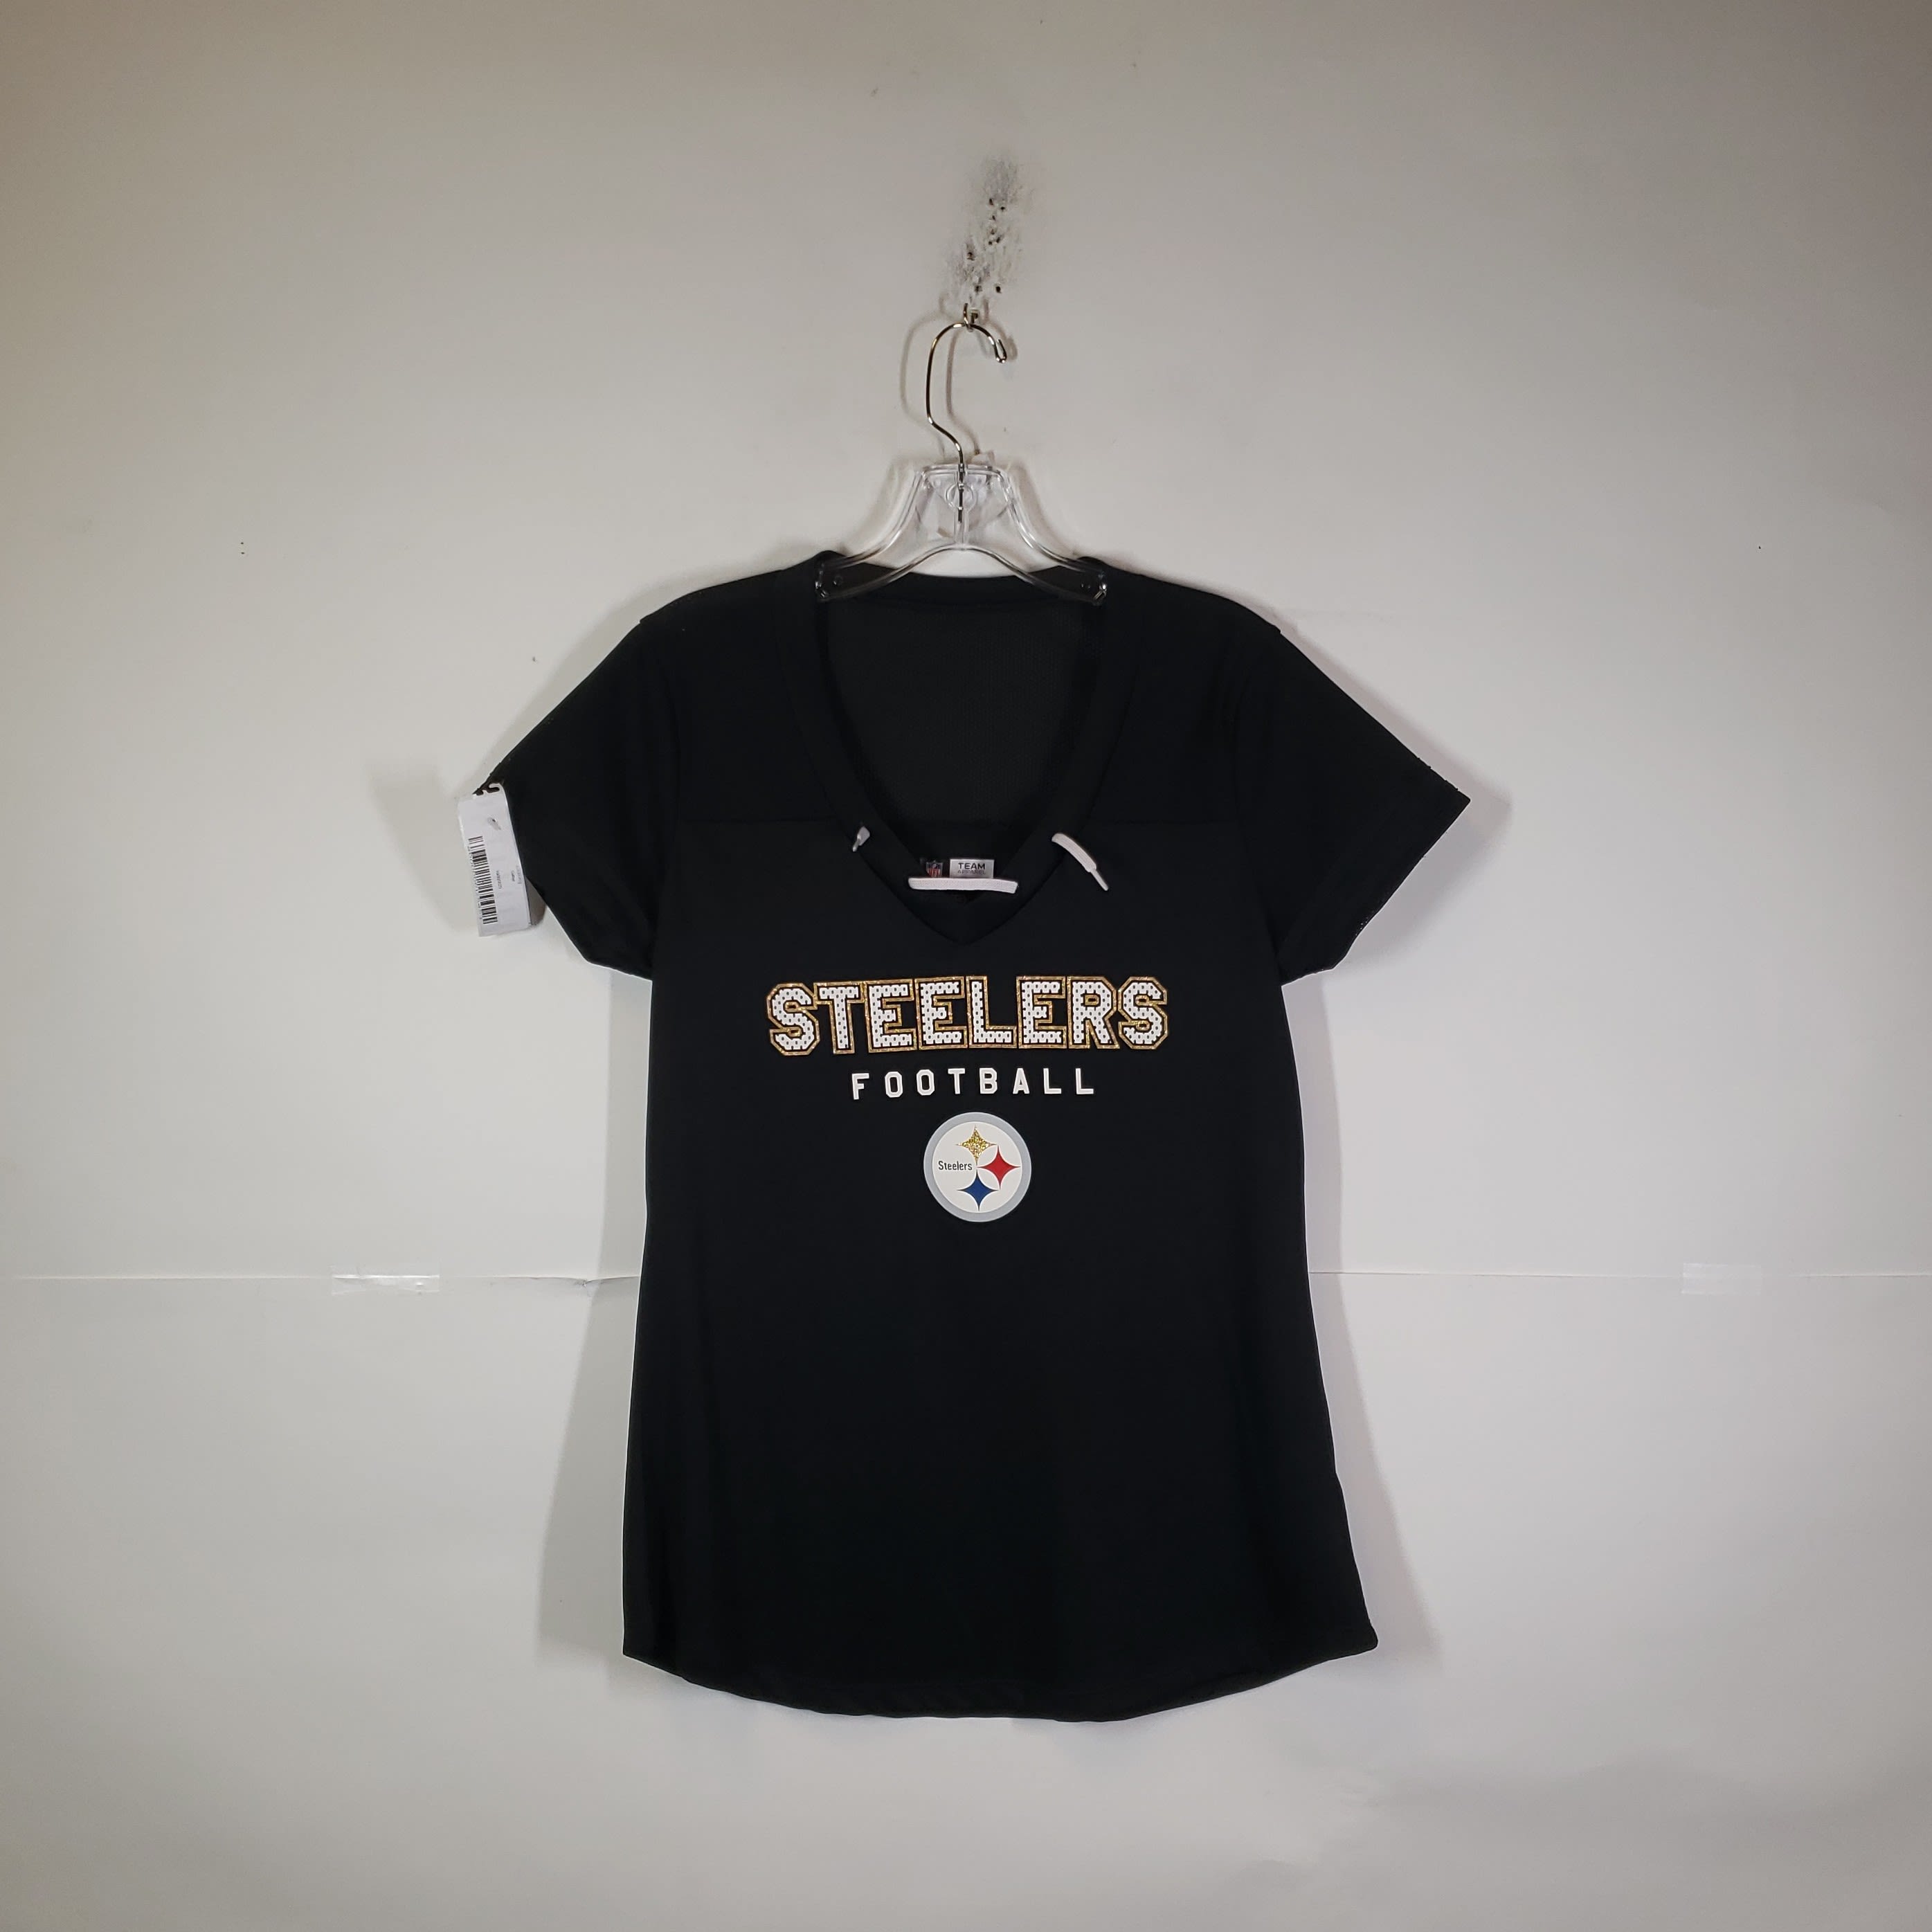 Pittsburgh Steelers Womens Sports Team Clothing